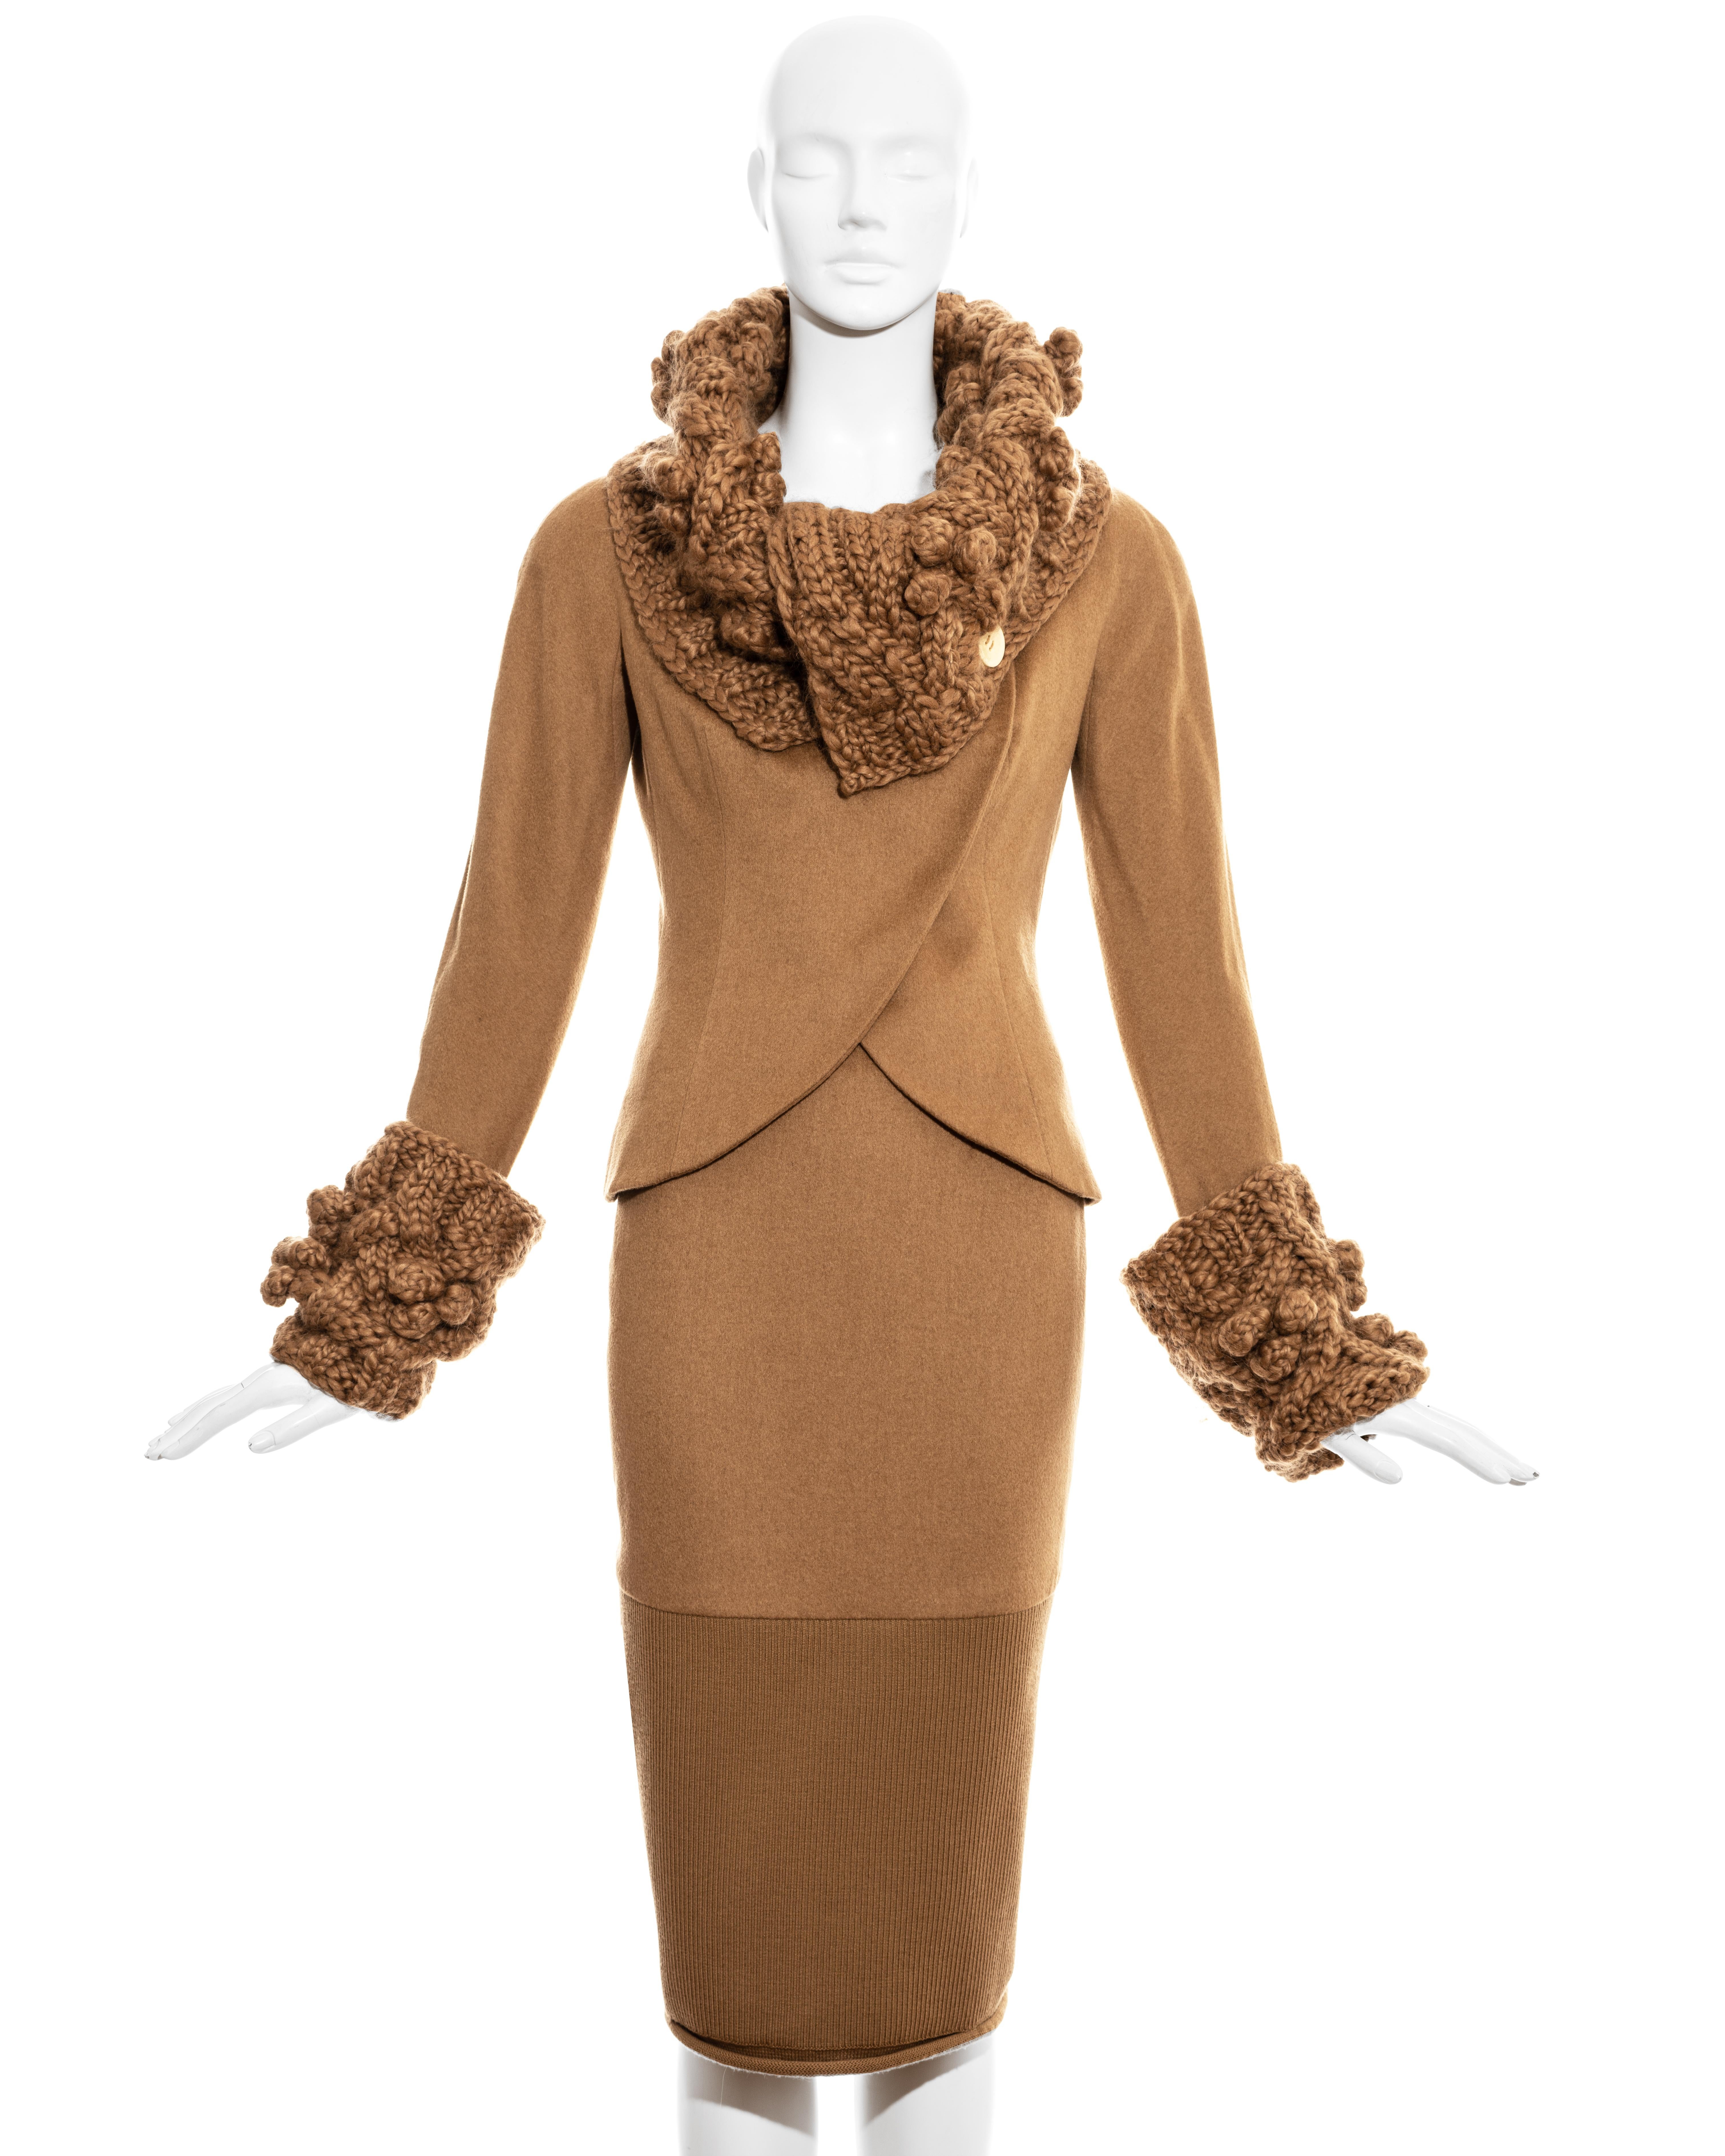 Christian Dior by John Galliano camel wool skirt suit comprising: fitted jacket with a chunky knitted collar and cuffs, and matching skirt with ribbed wool hem and large button back fastening. 

Fall-Winter 1999